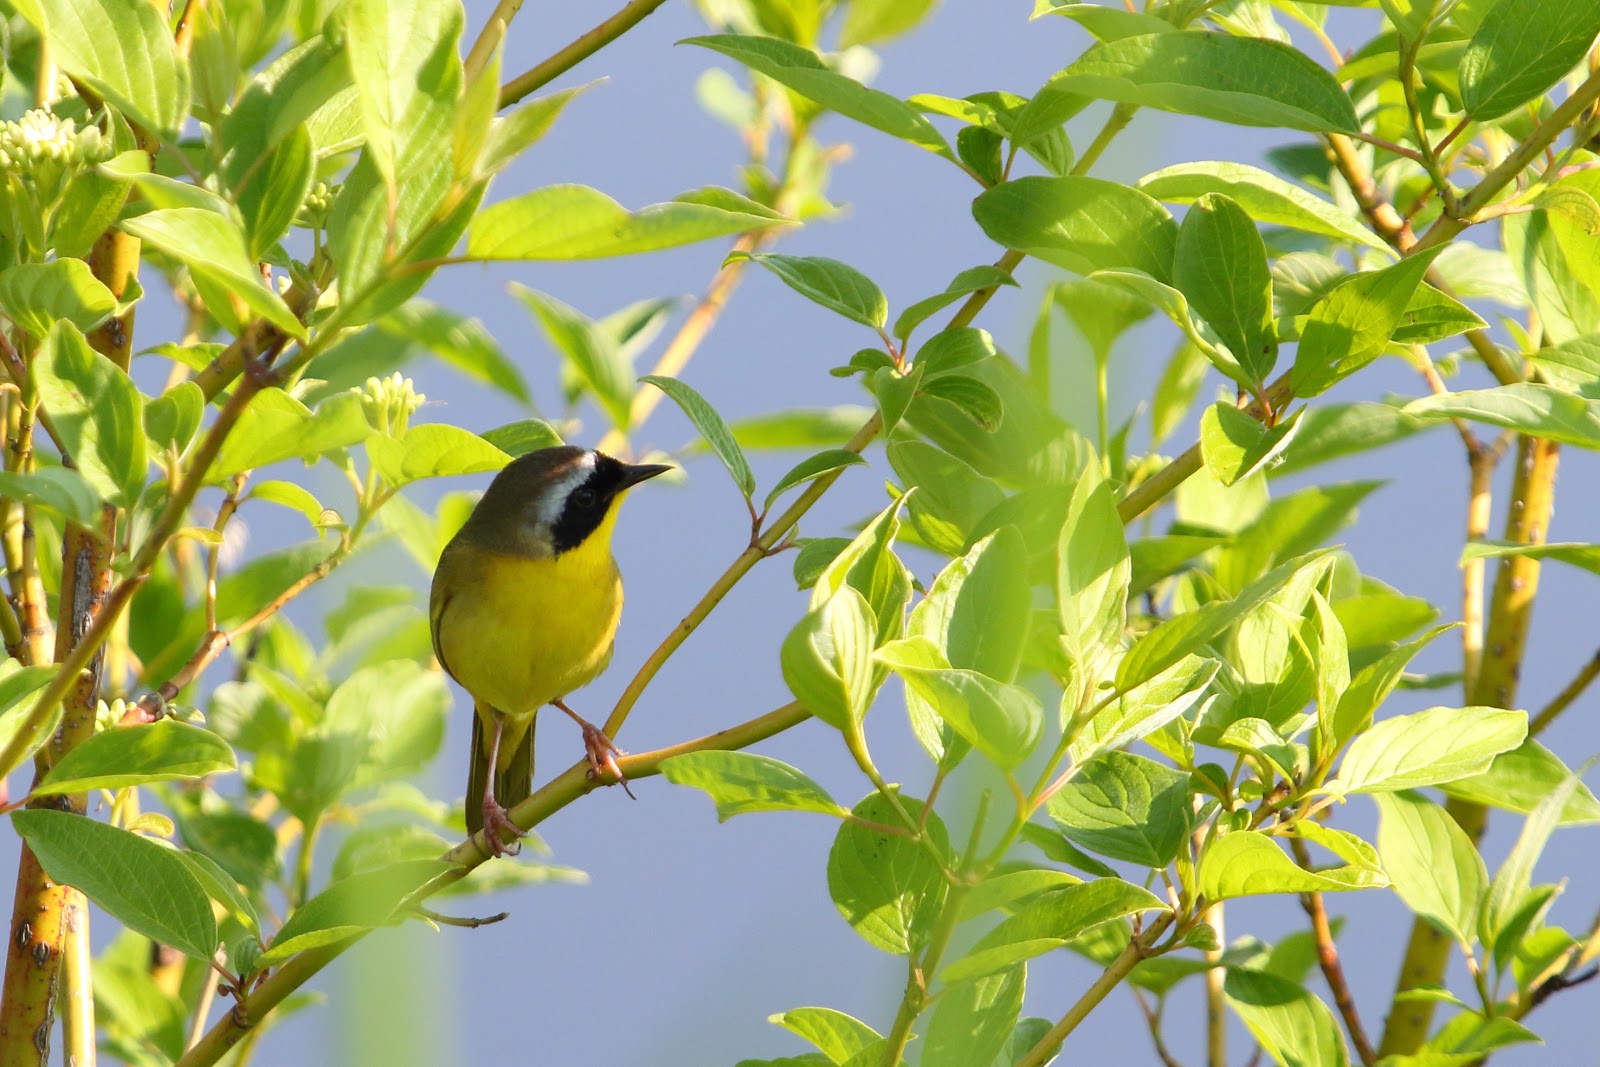 Common Yellowthroat image - click on image for sound